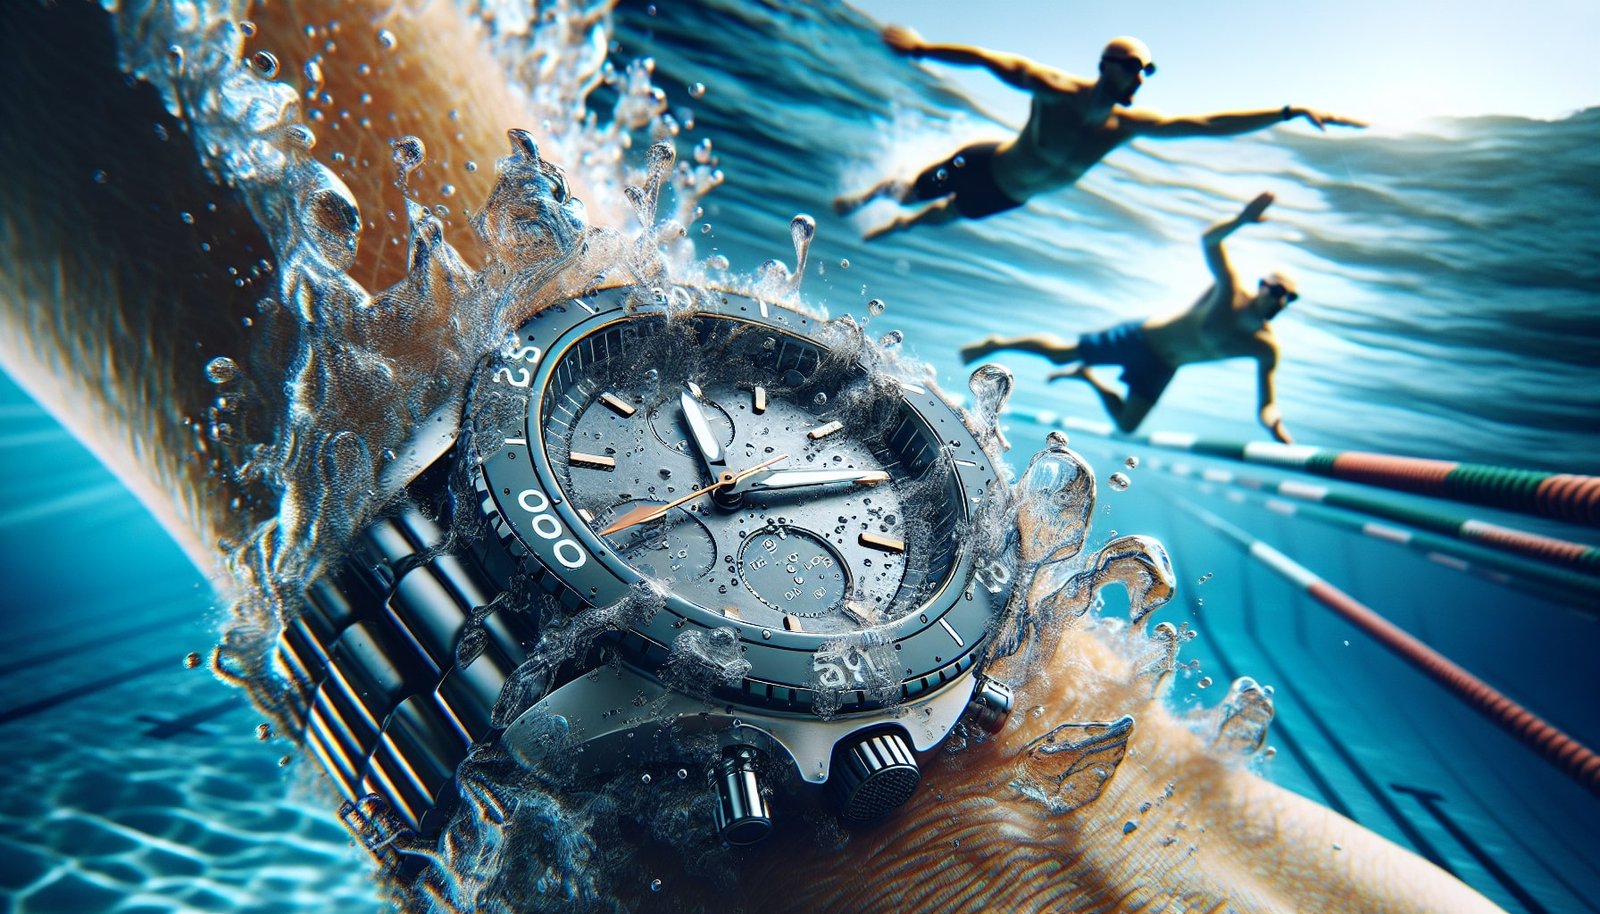 Can You Swim Safely with an IP68 Watch?